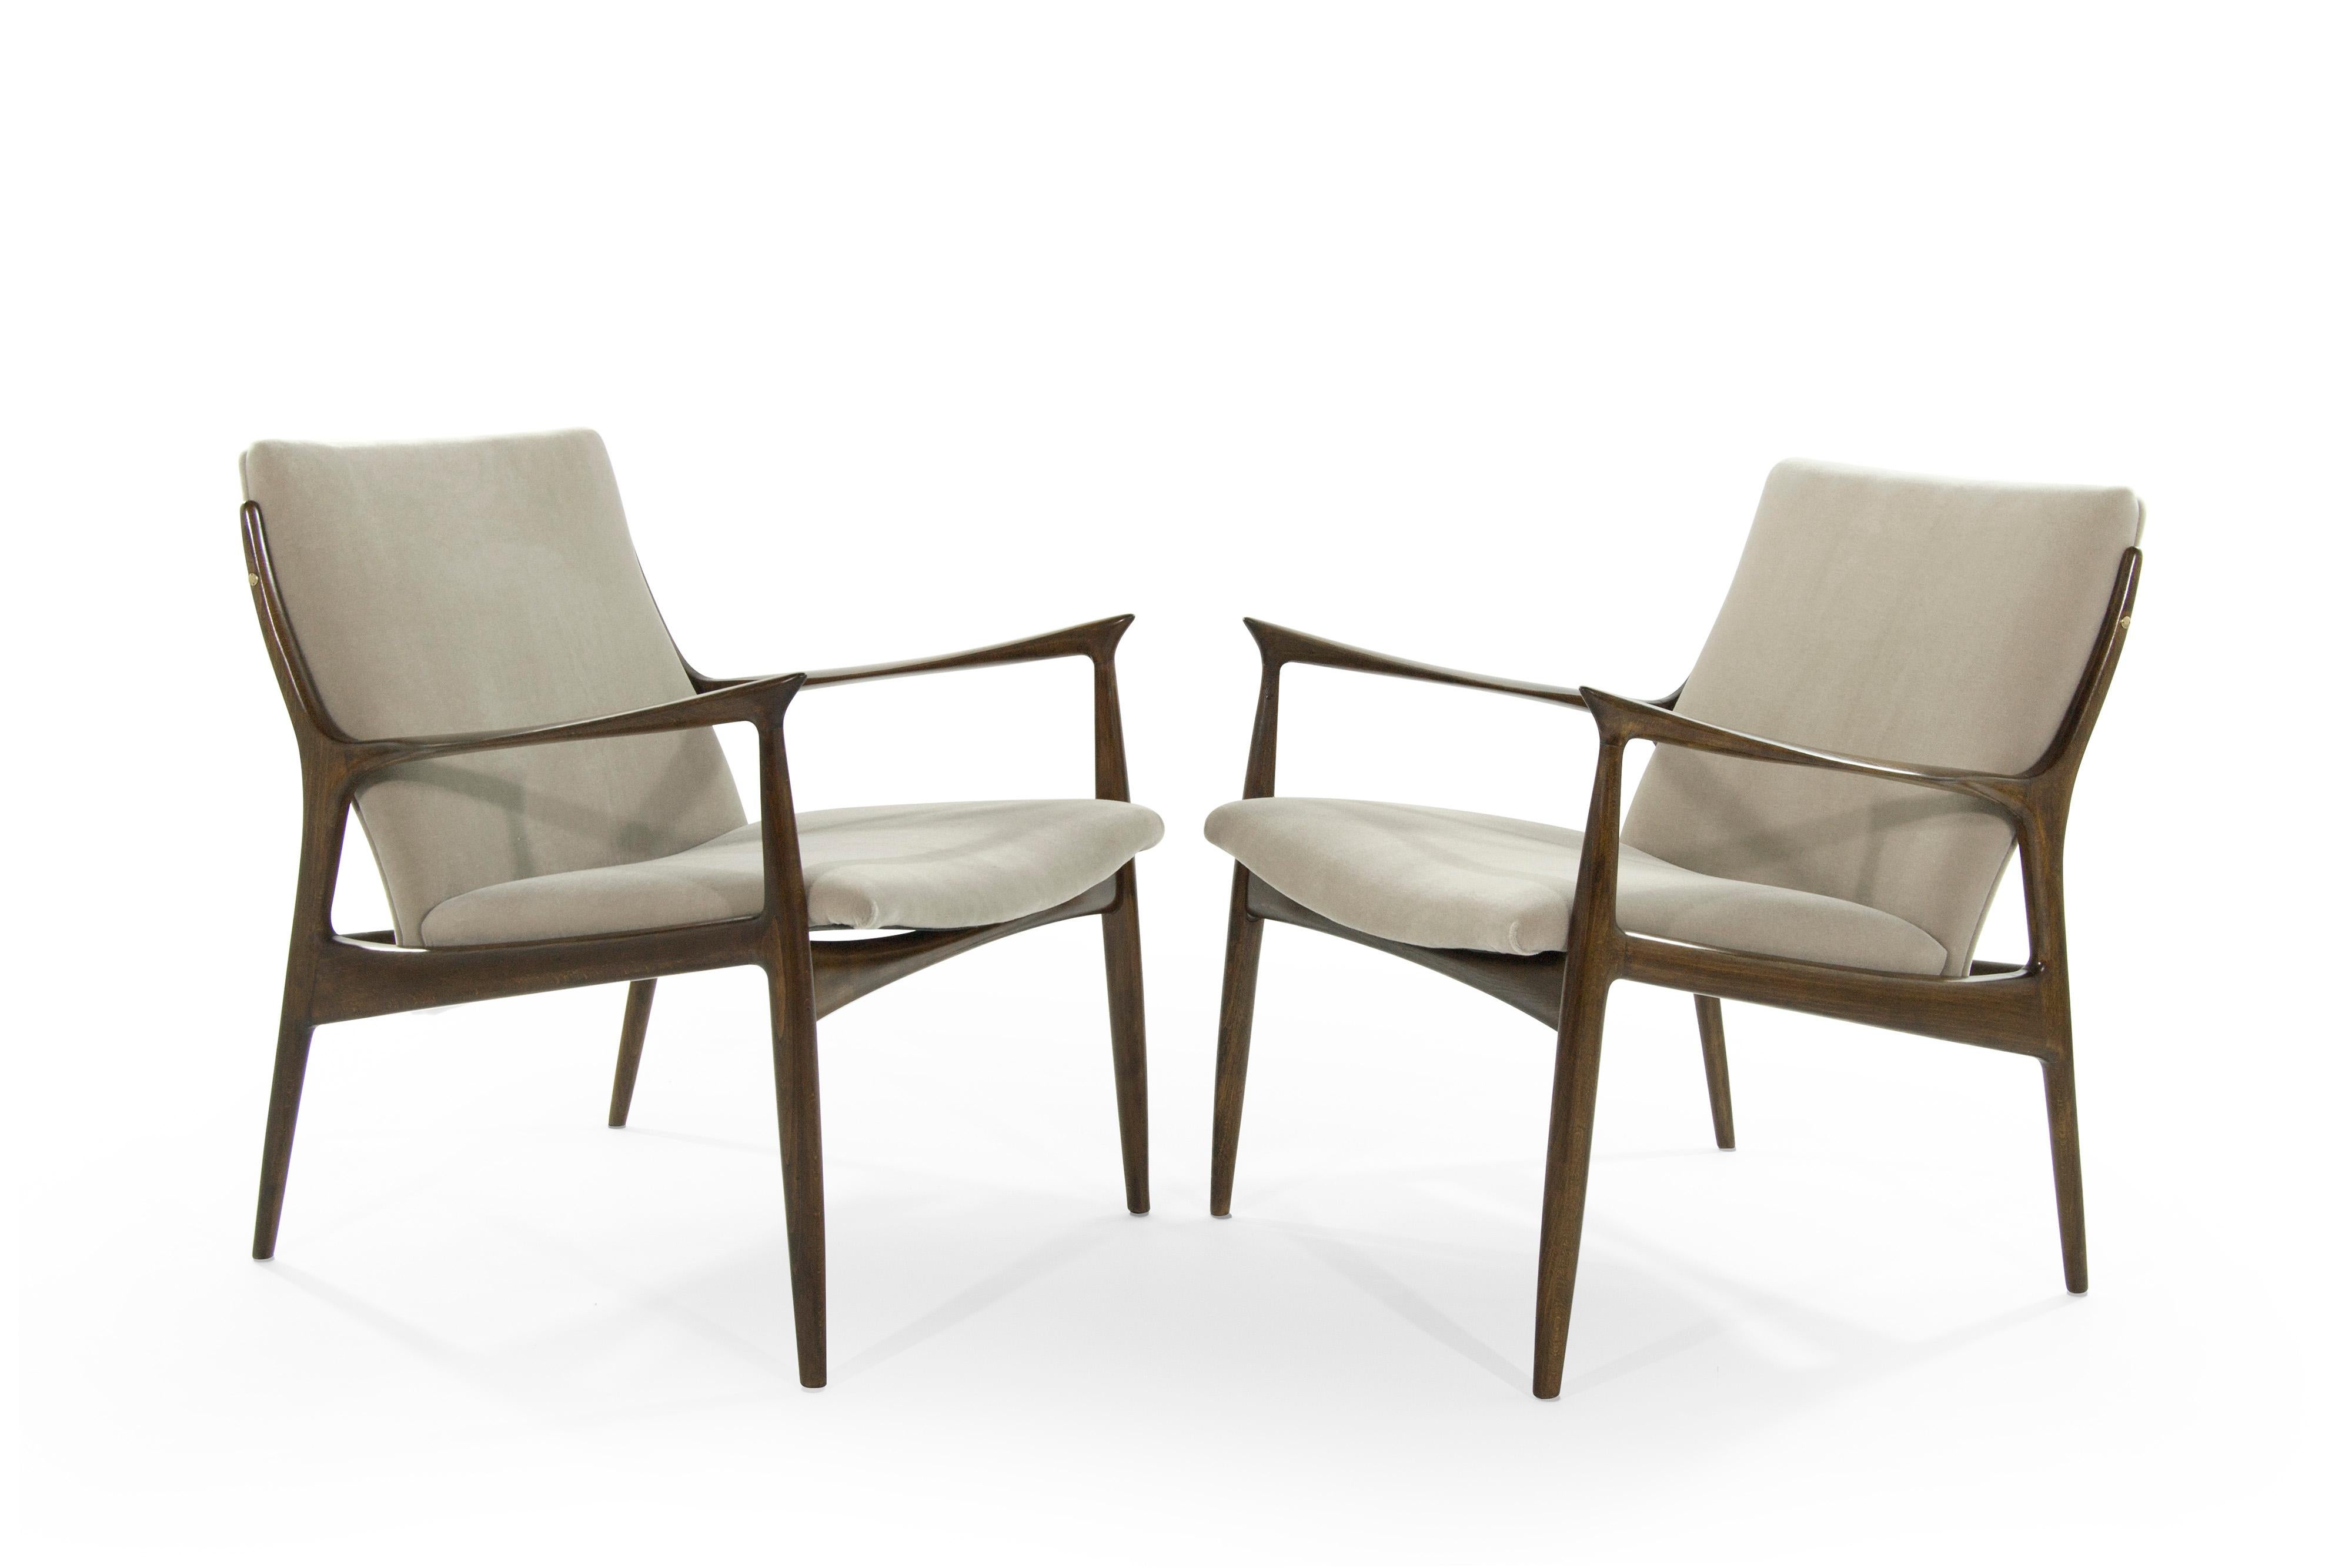 Pair of sculptural Danish modern lounge chairs designed by Ib Kofod-Larsen. Sculptural frames fully restored. Seat and backrest newly upholstered in natural mohair.
 